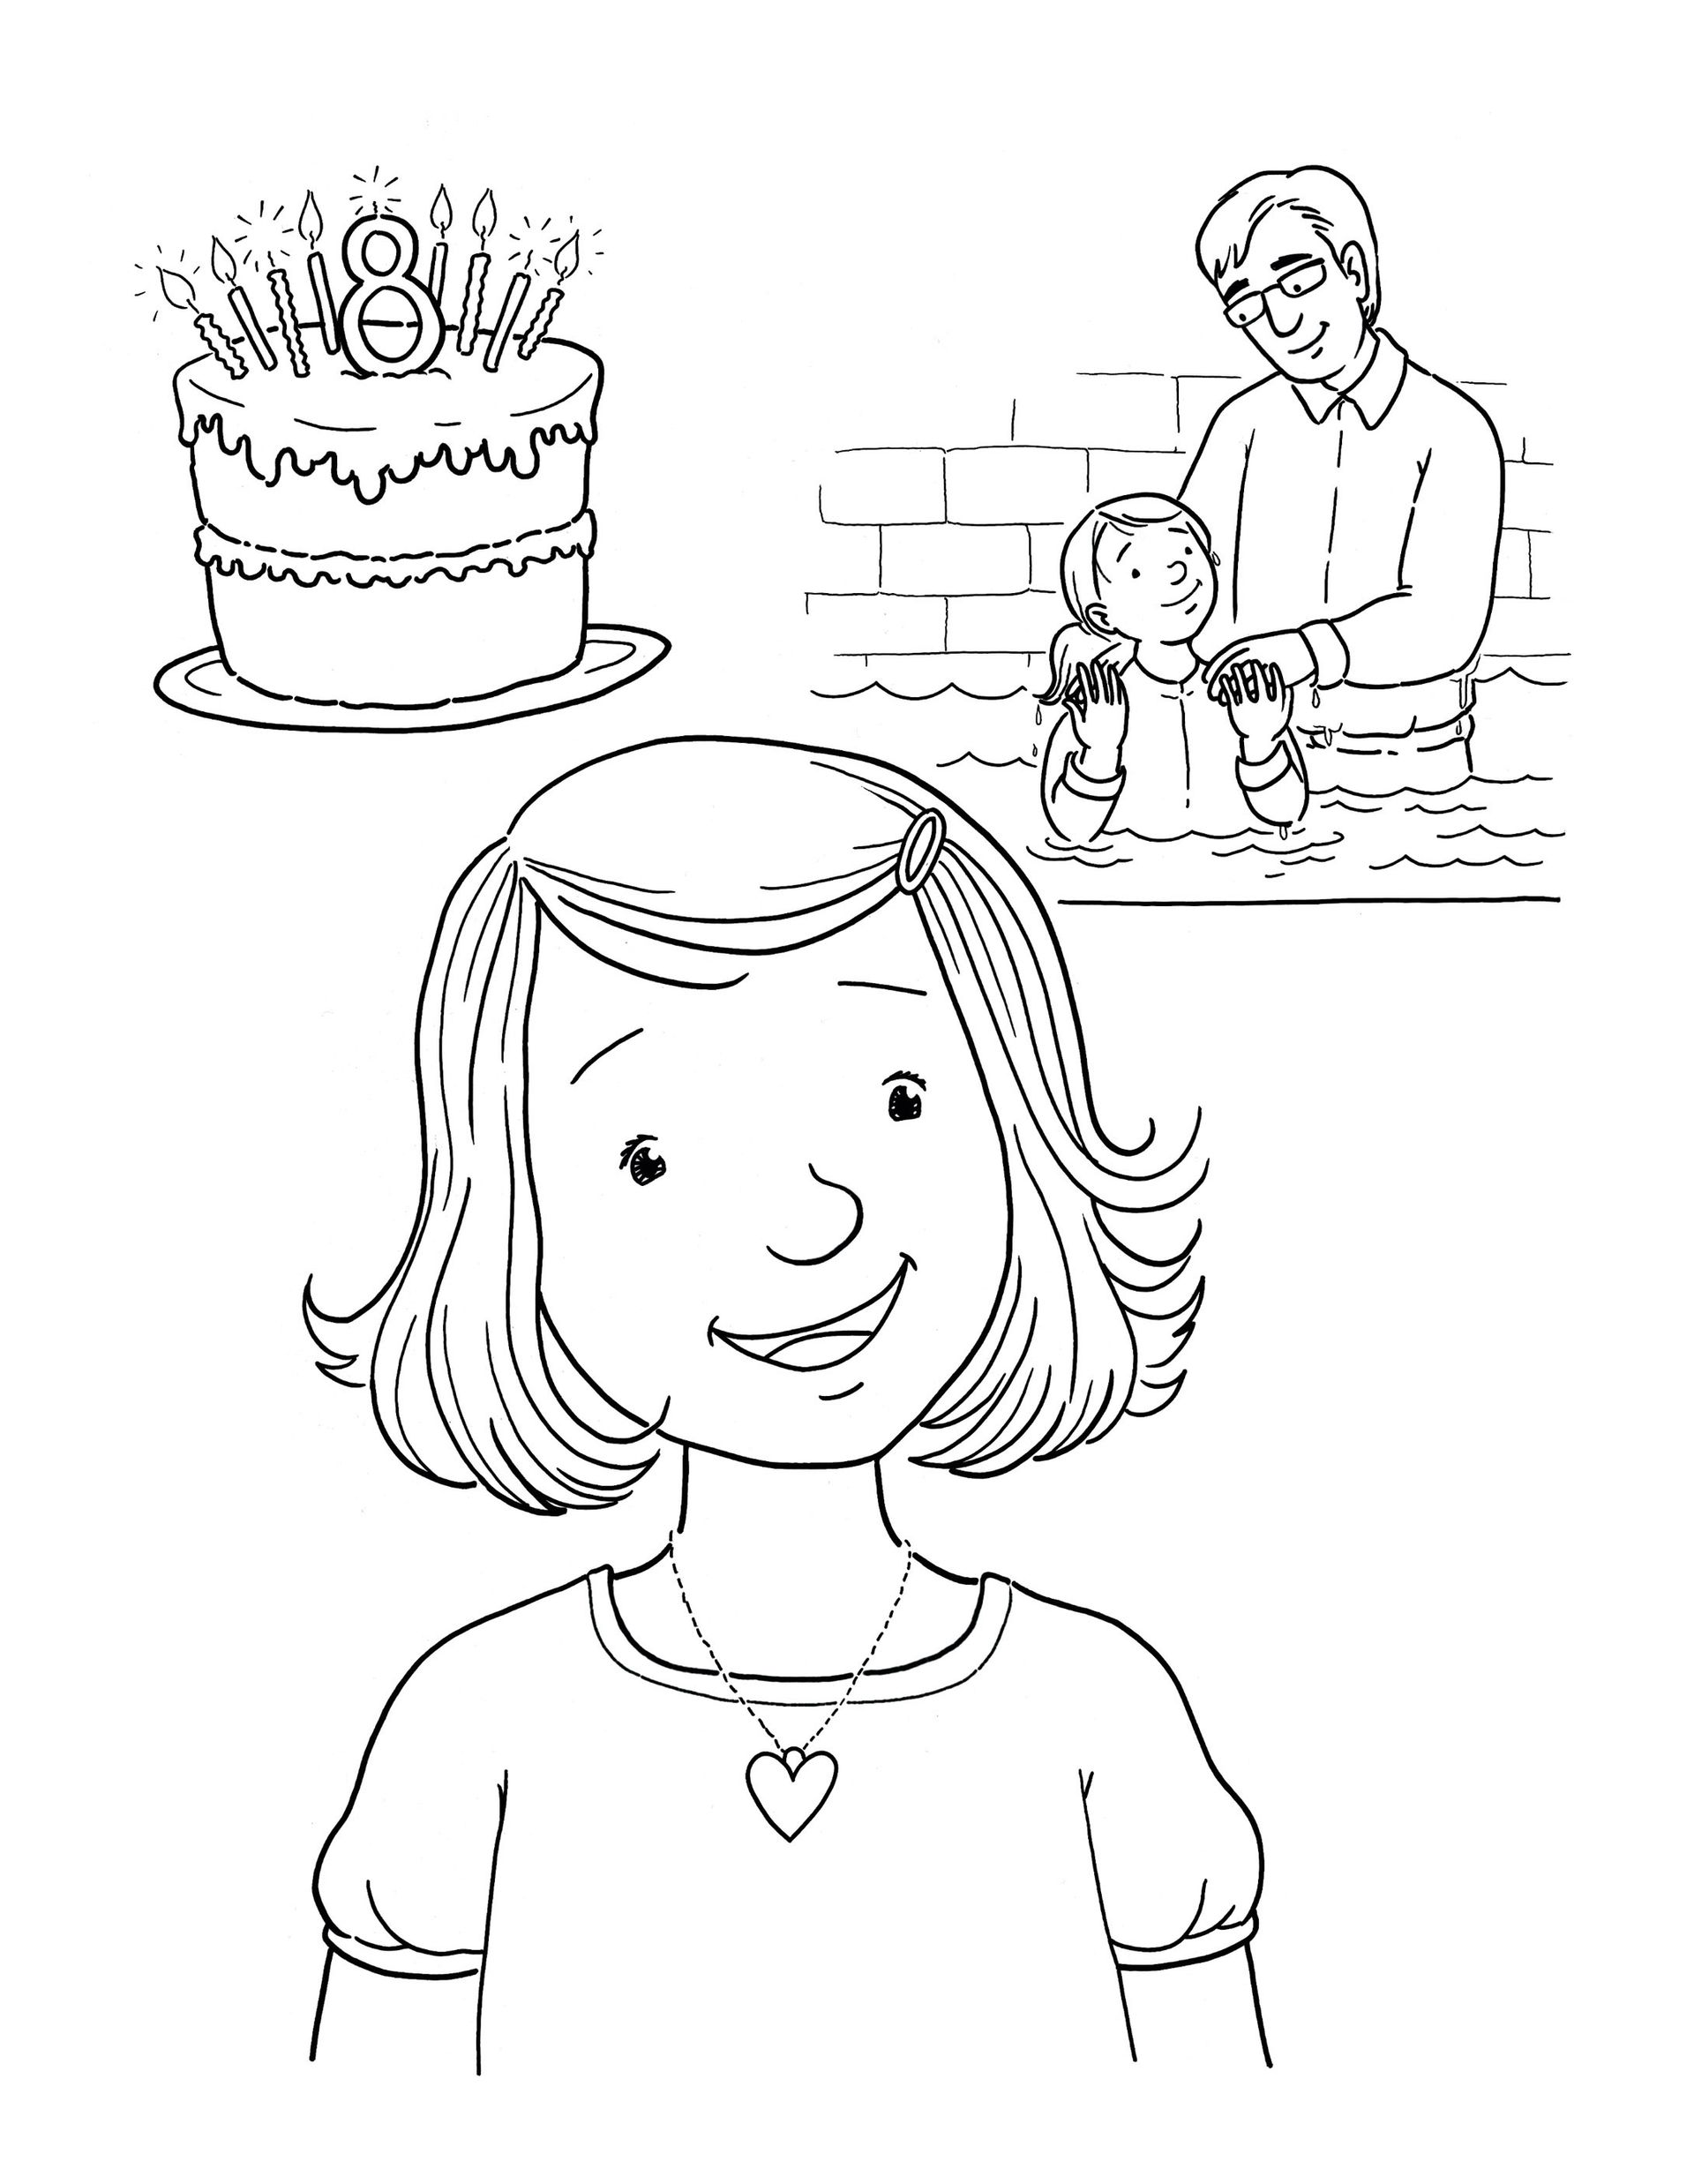 A girl thinks about her eighth birthday, her birthday cake, and being baptized.